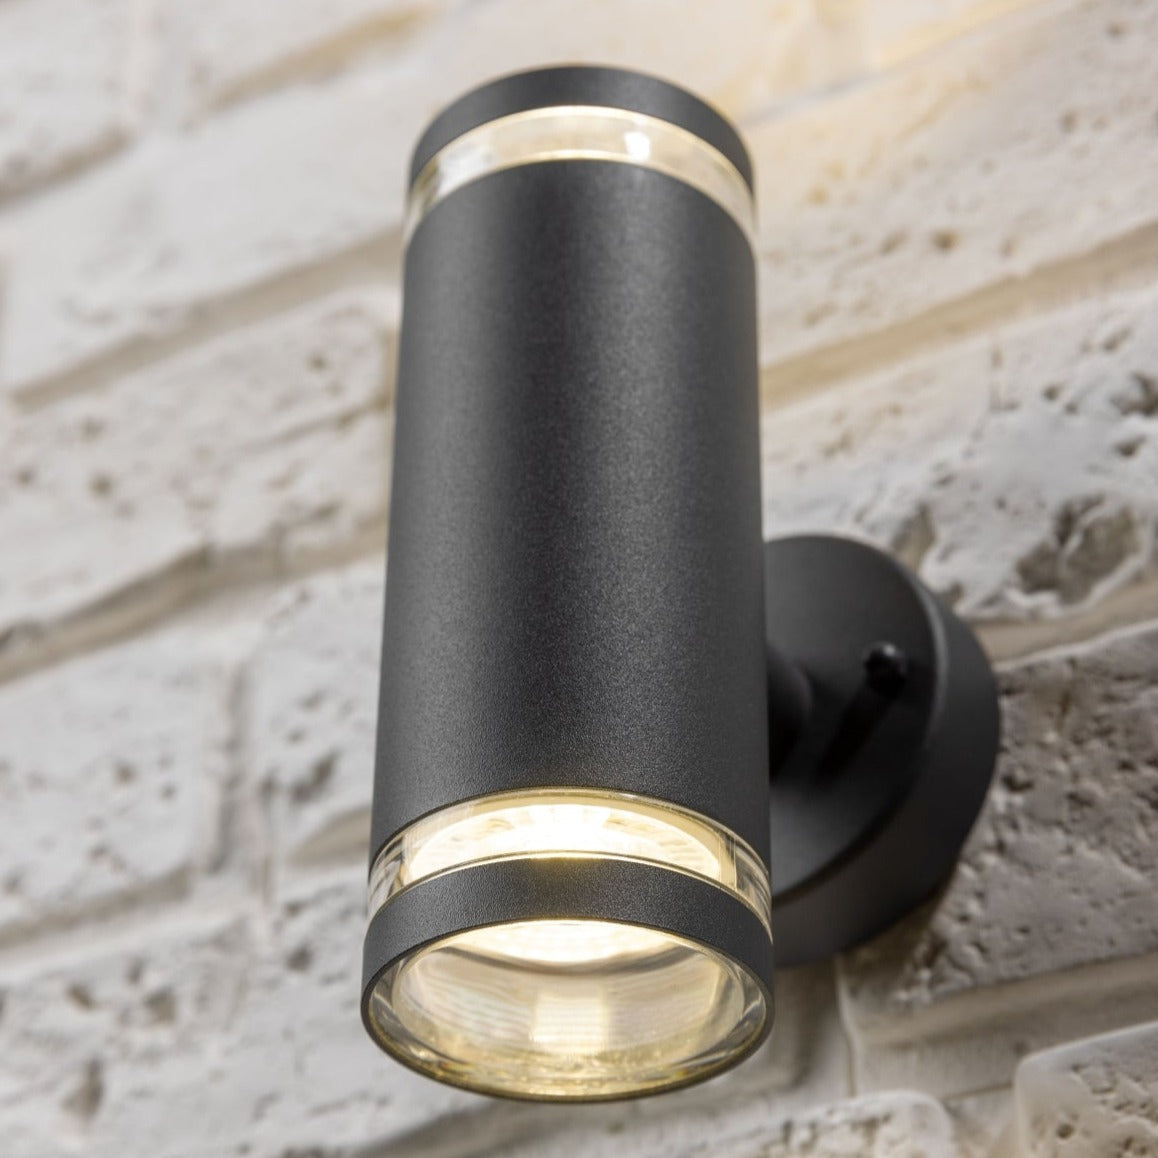 Our Jennifer dark grey outdoor wall mounted up and down cylinder outdoor light would look perfect in a modern or more traditional home design. Outside wall lights can provide atmospheric light in your garden, at the front door or on the terrace as well as a great security solution. It is designed for durability and longevity with its robust material producing a fully weatherproof and water resistant light fitting